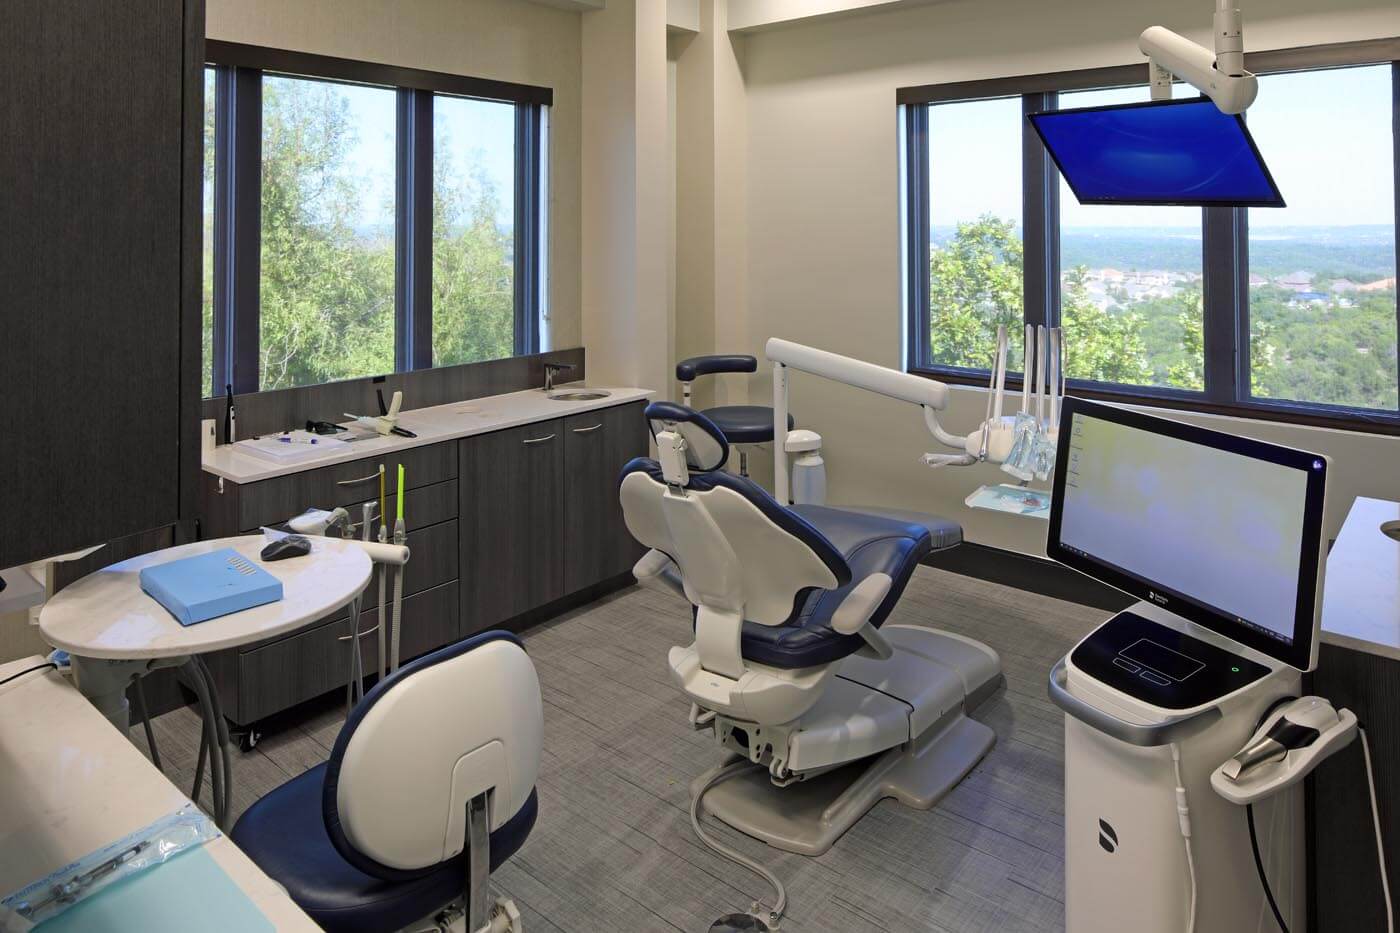 A view inside one of SkyRidge Dental's clean and sleek exam rooms, where various technology alongside an exam chair can be seen. A beautiful view of Lakeway, Texas can be seen outside the large windows.